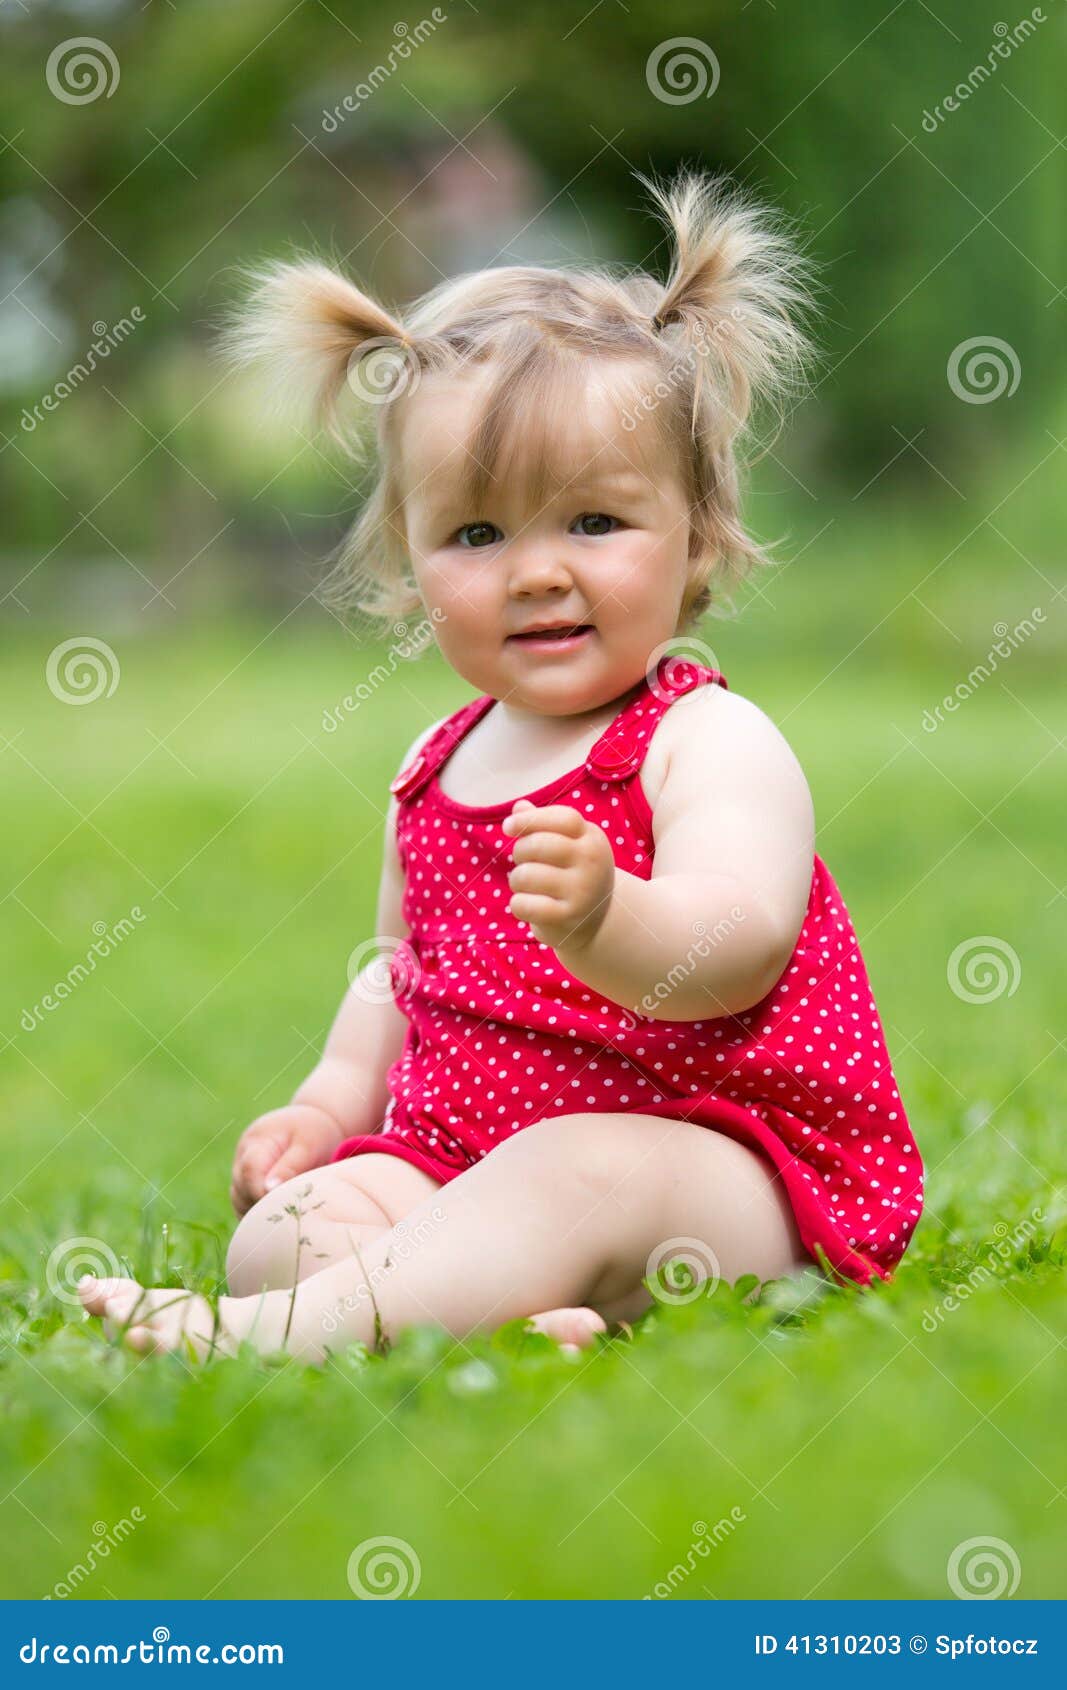 Baby on the grass stock image. Image of outside, grass - 41310203